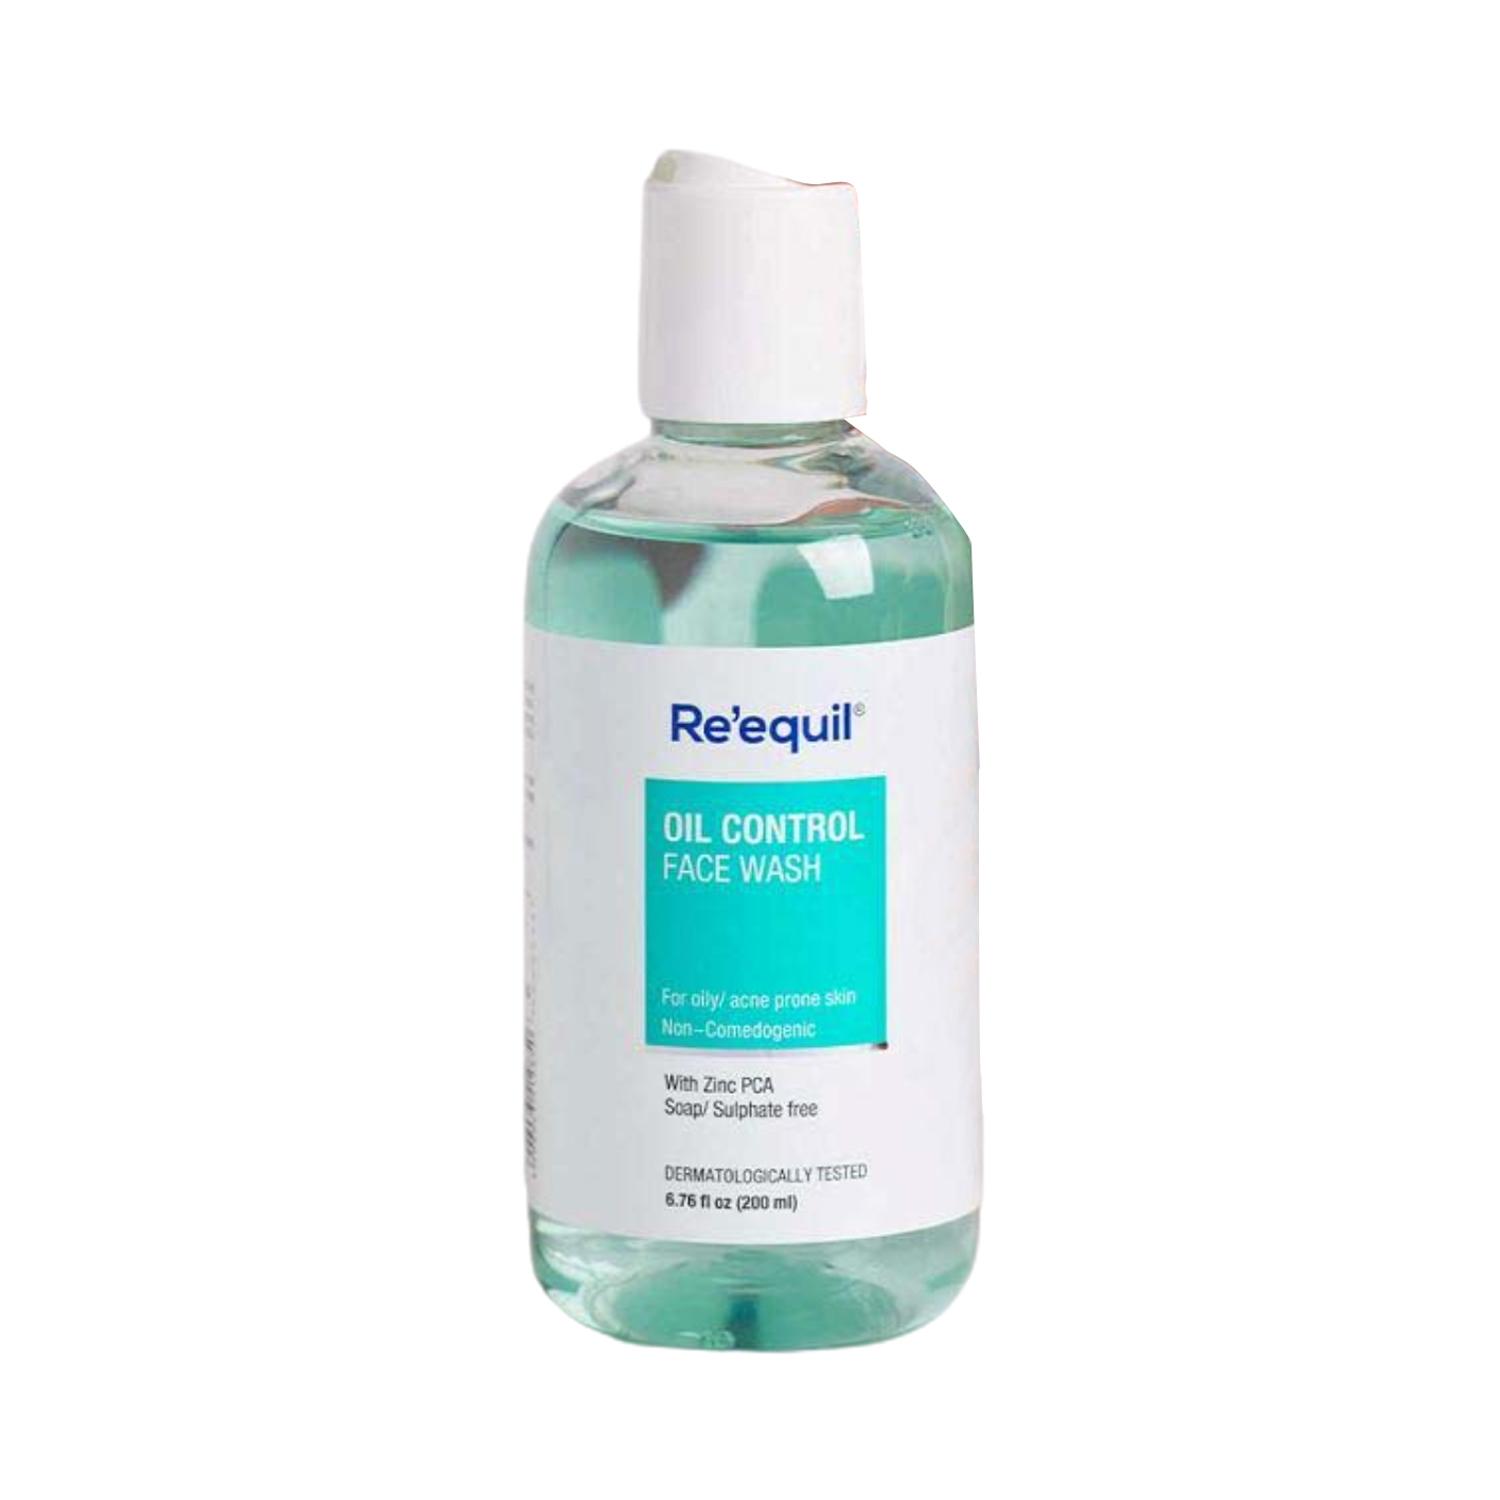 re'equil-oil-control-face-wash-(200ml)